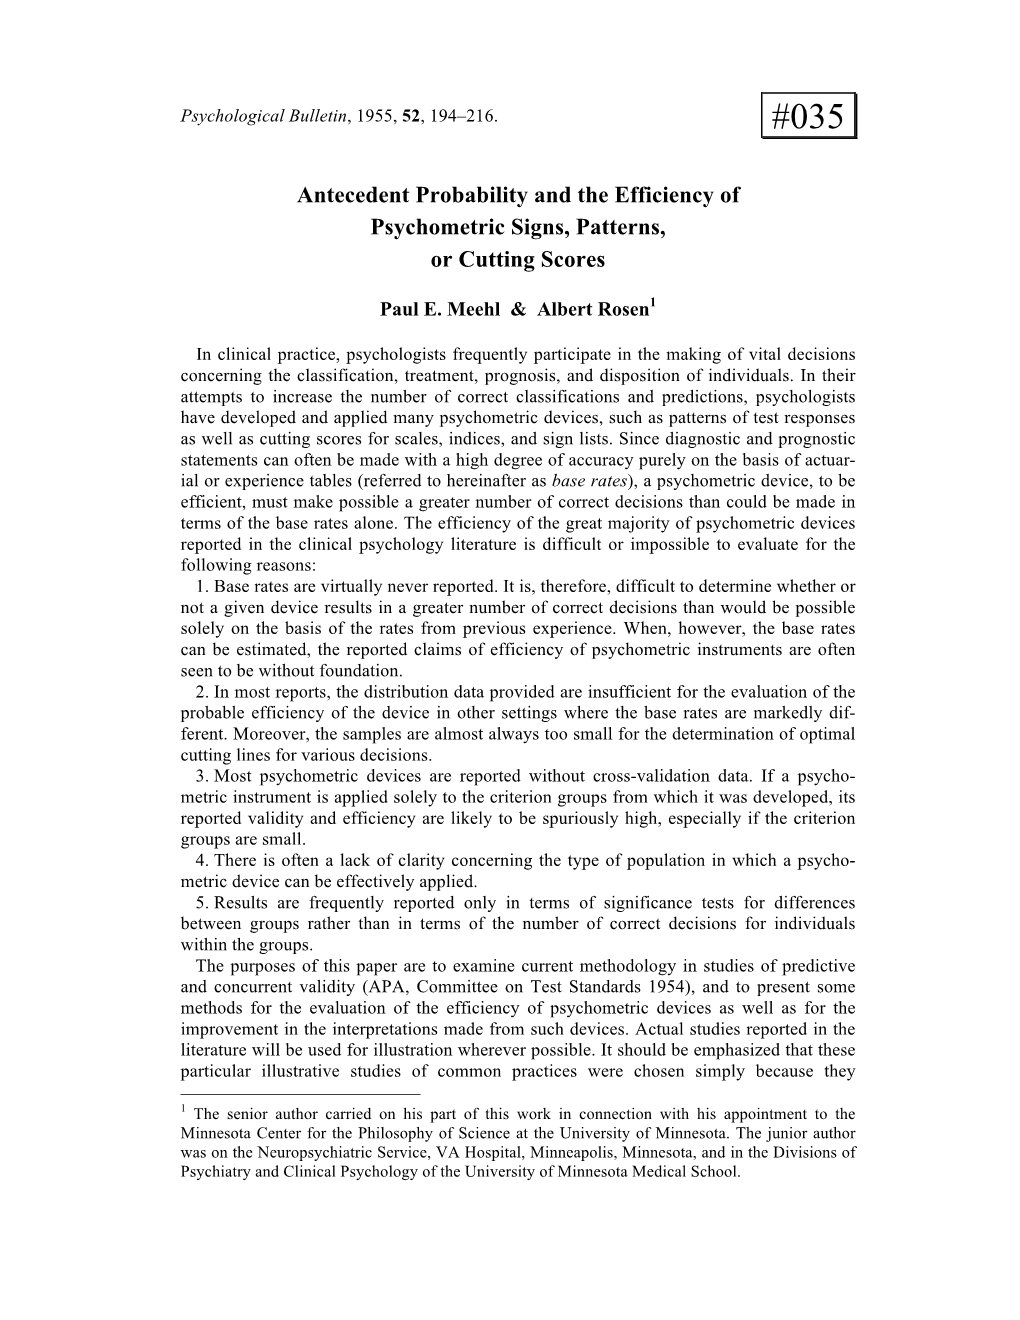 Antecedent Probability and the Efficiency of Psychometric Signs, Patterns, Or Cutting Scores